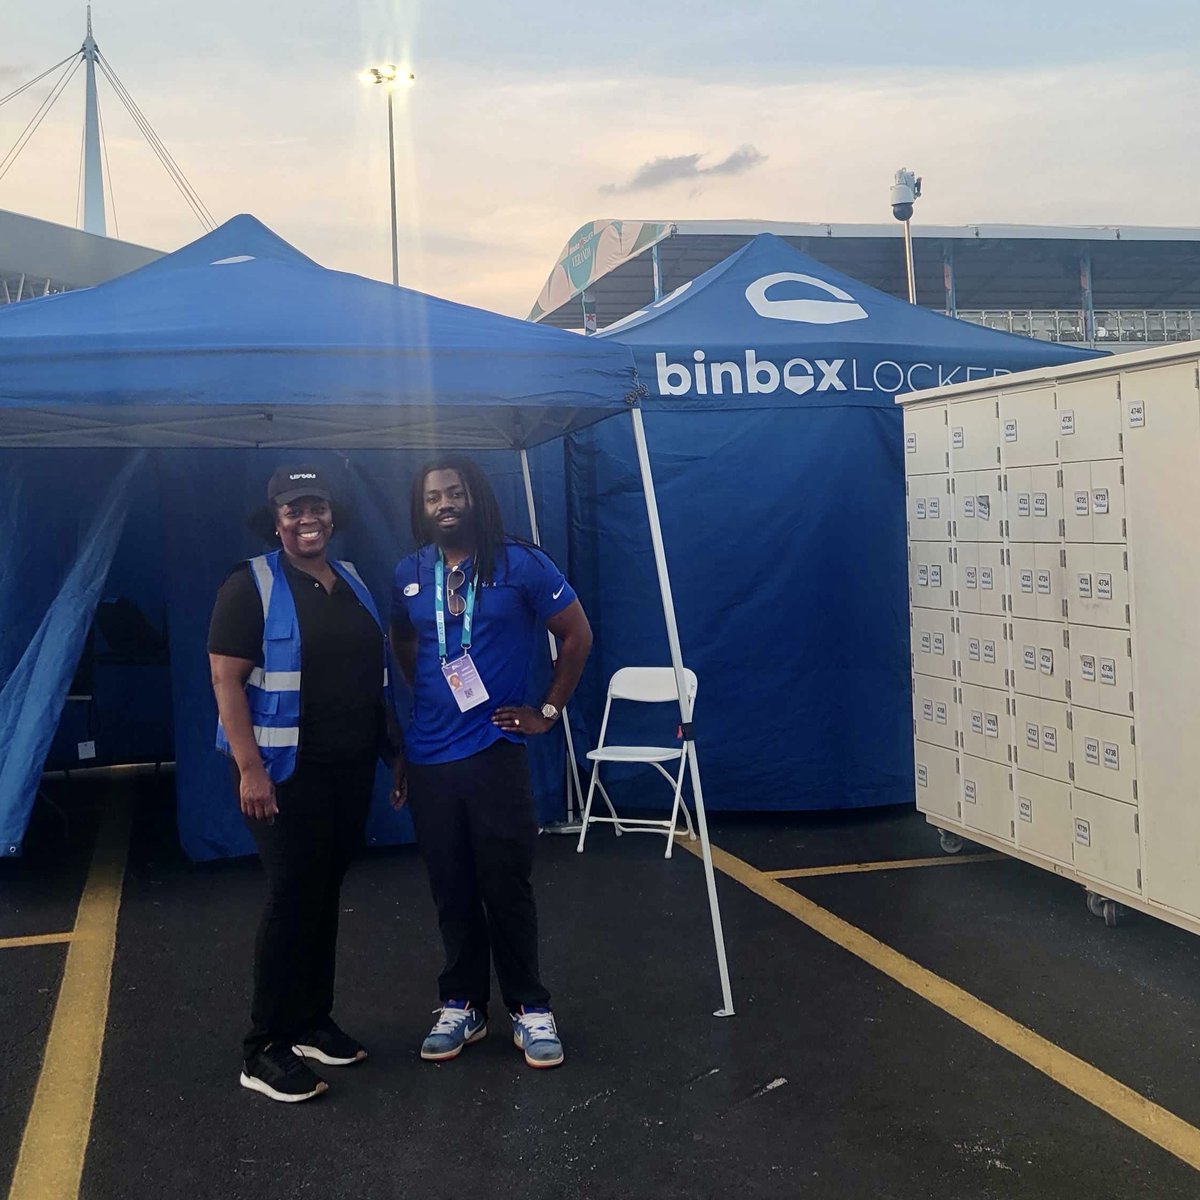 #TBT to the Formula 1 Event in Miami 

Download the app, find Binbox at your venue, and store your gear. On your mark, get set, go! 

#throwbackthursday #eventstorage #binboxapp #venuestorage #securelocker #securestorage #storageideas #personalstorage